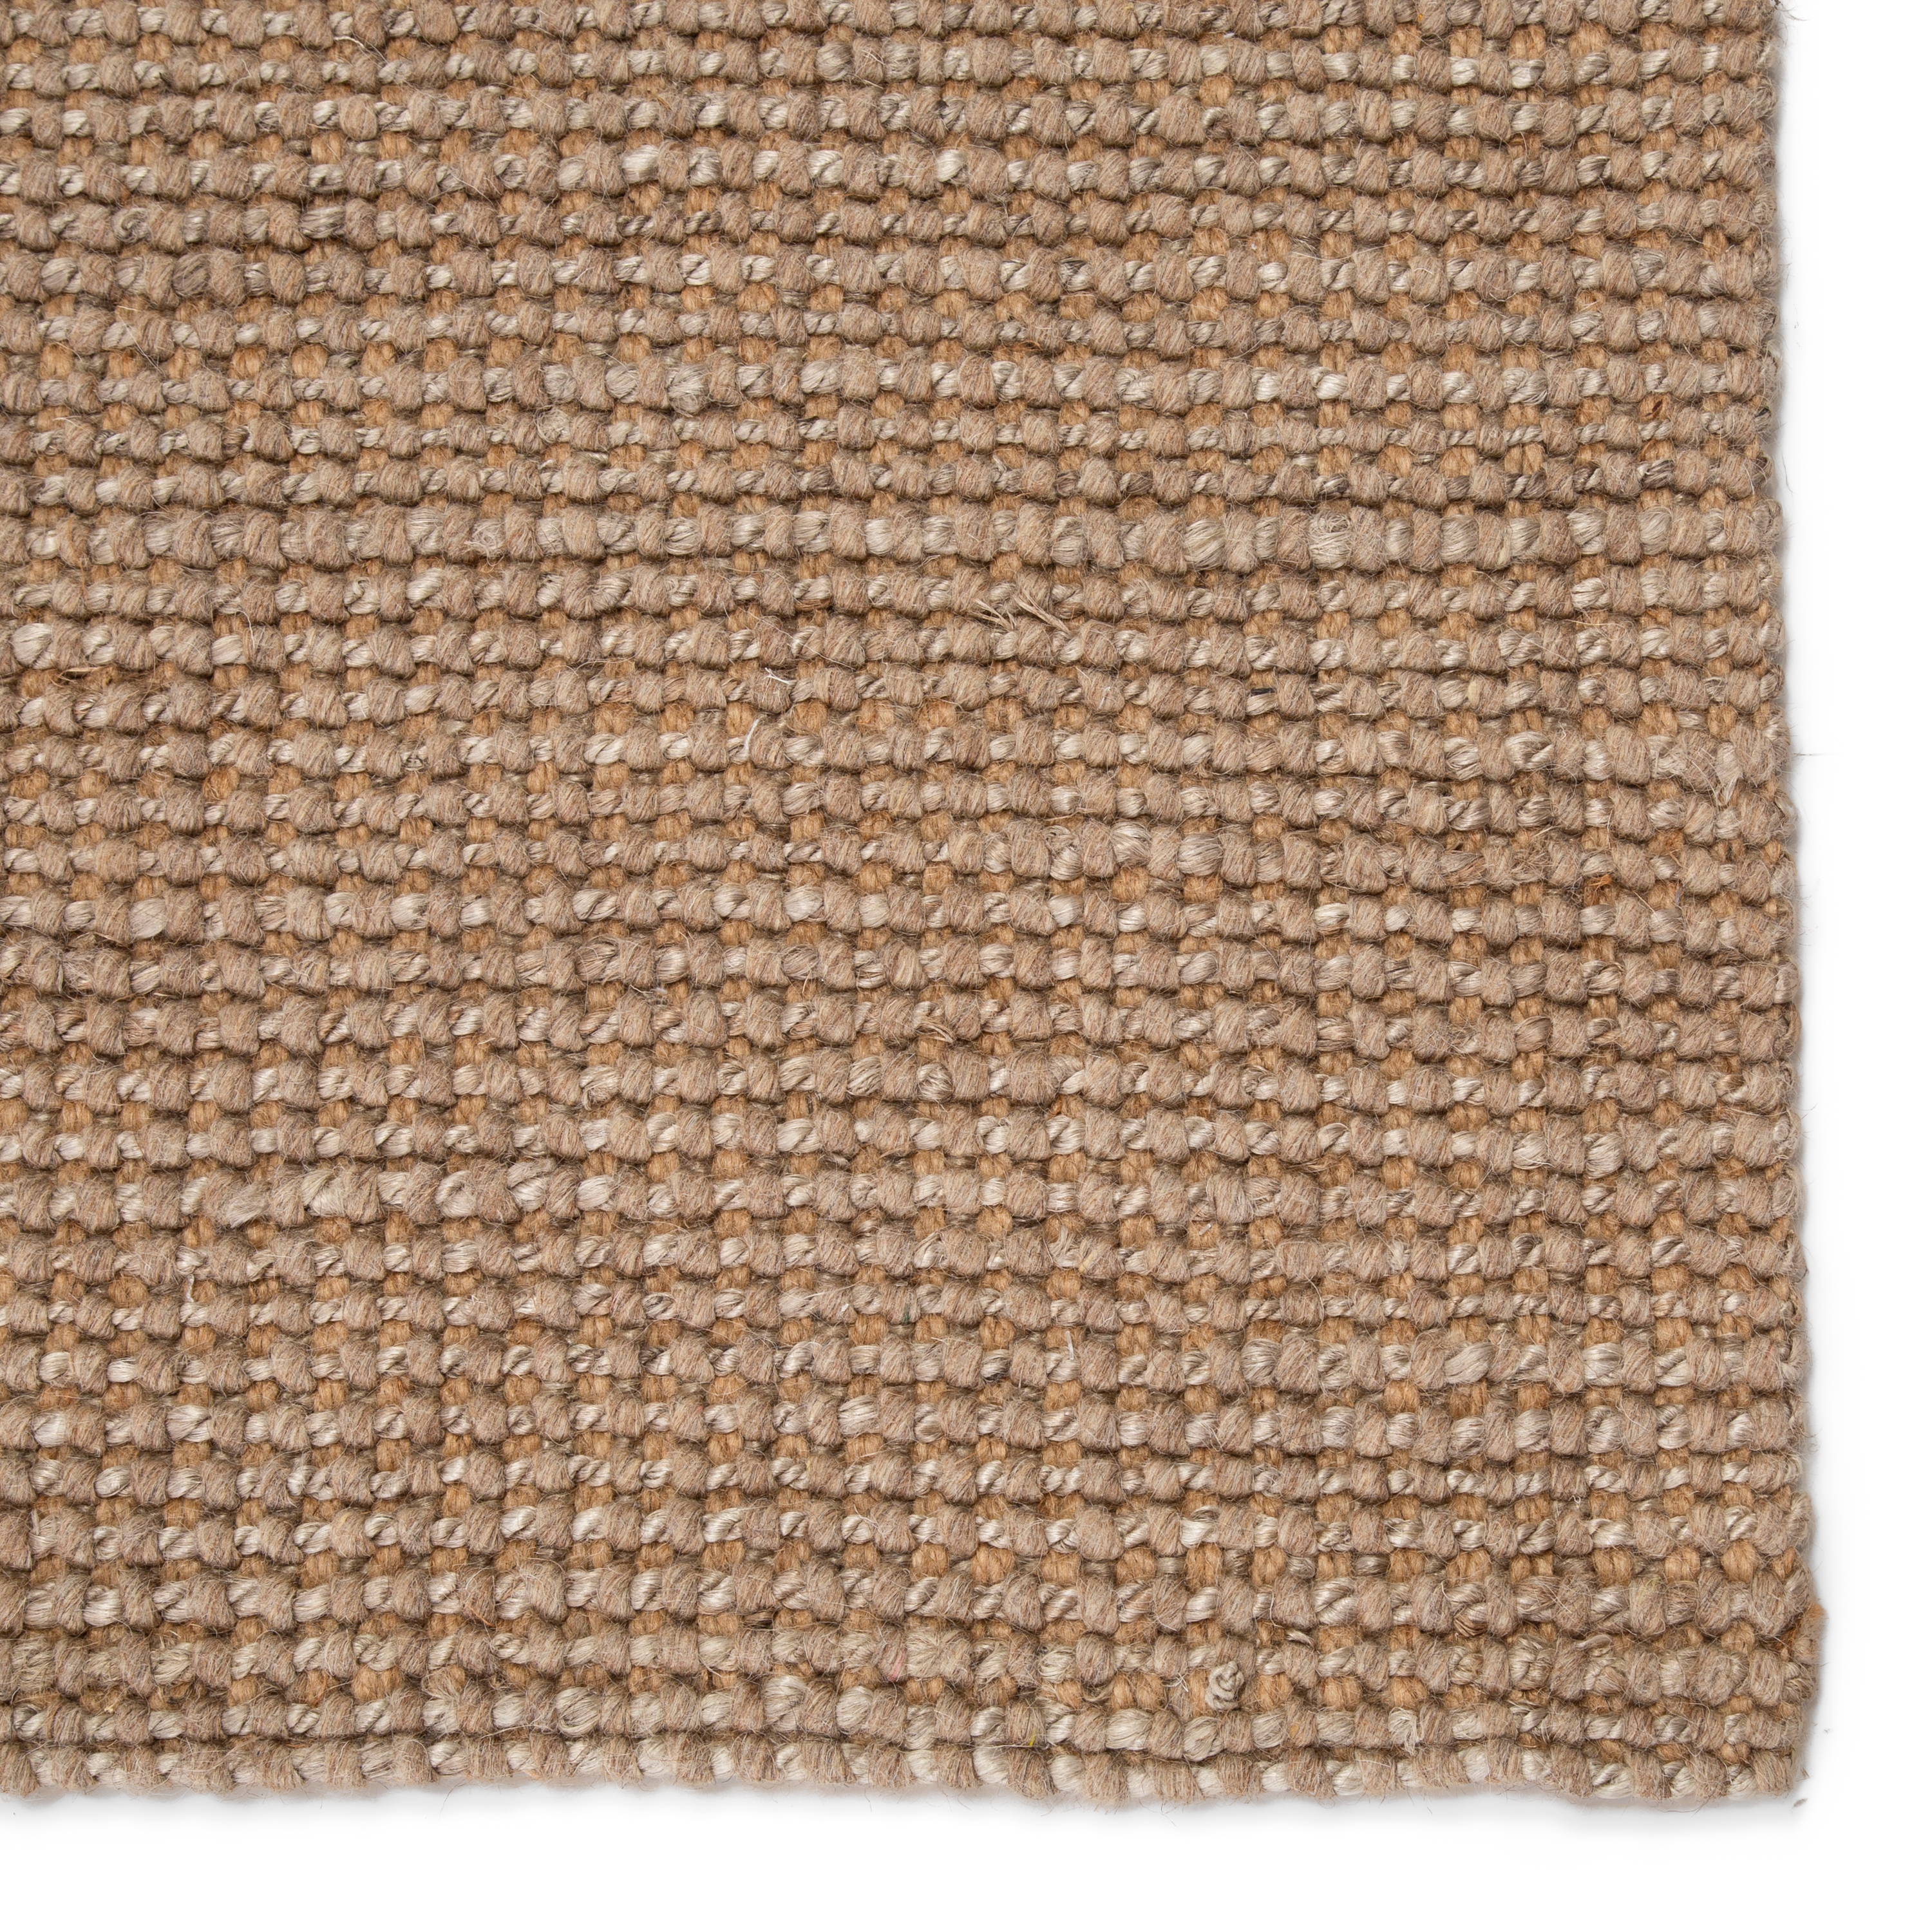 Beech Natural Solid Tan/ Taupe Area Rug (5'X8') - Image 3